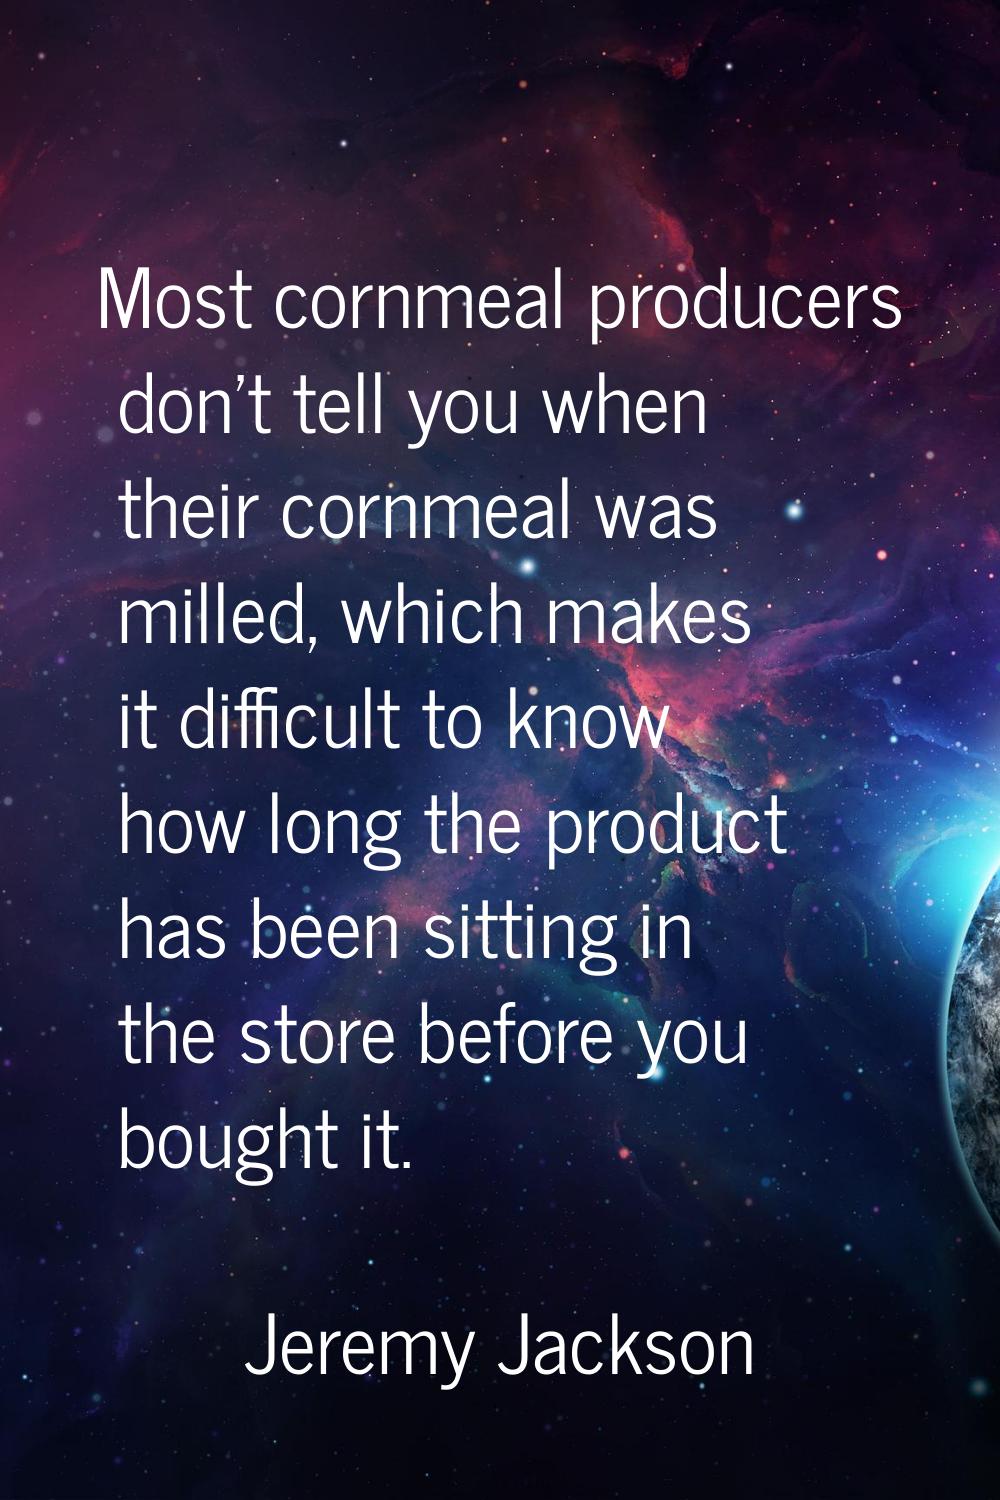 Most cornmeal producers don't tell you when their cornmeal was milled, which makes it difficult to 